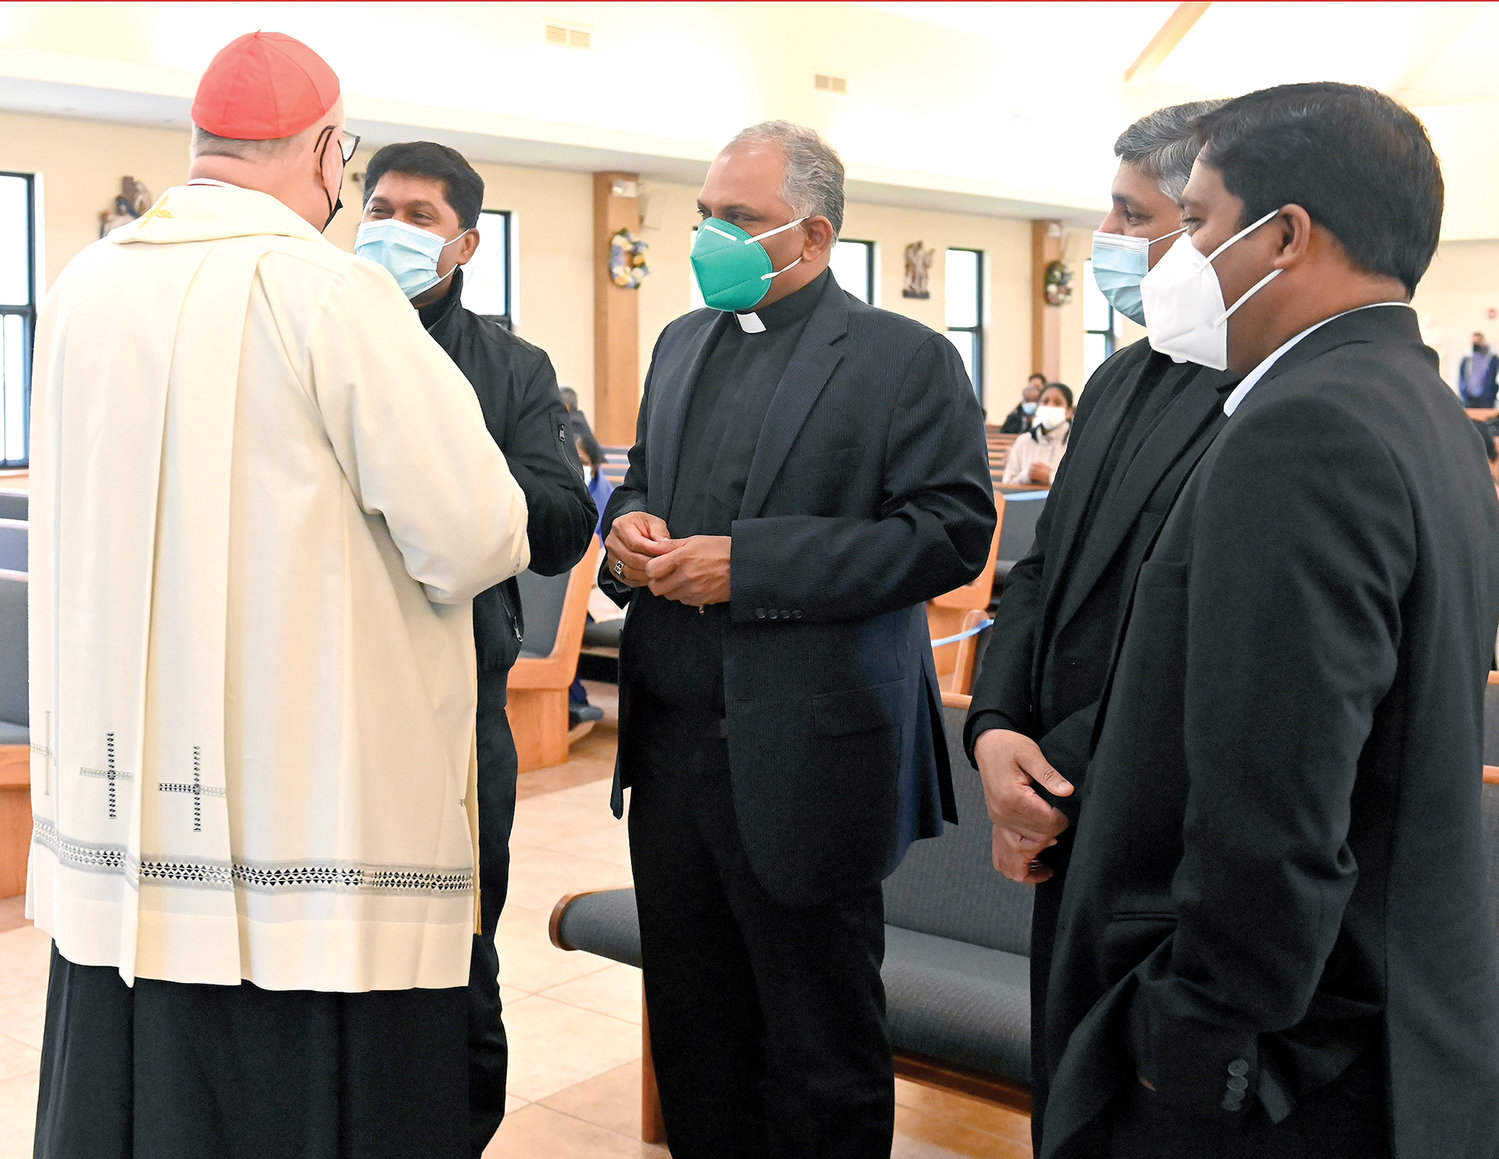 The cardinal speaks with four priests who are natives of India now serving in the Archdiocese of New York that each led a decade of the Rosary. From left, they are Father Bipy Mathew Tharayil, Father Ravi K. Dasari, C.O., Father Francis Dasari and Father Joseph Narisetty, C.O.